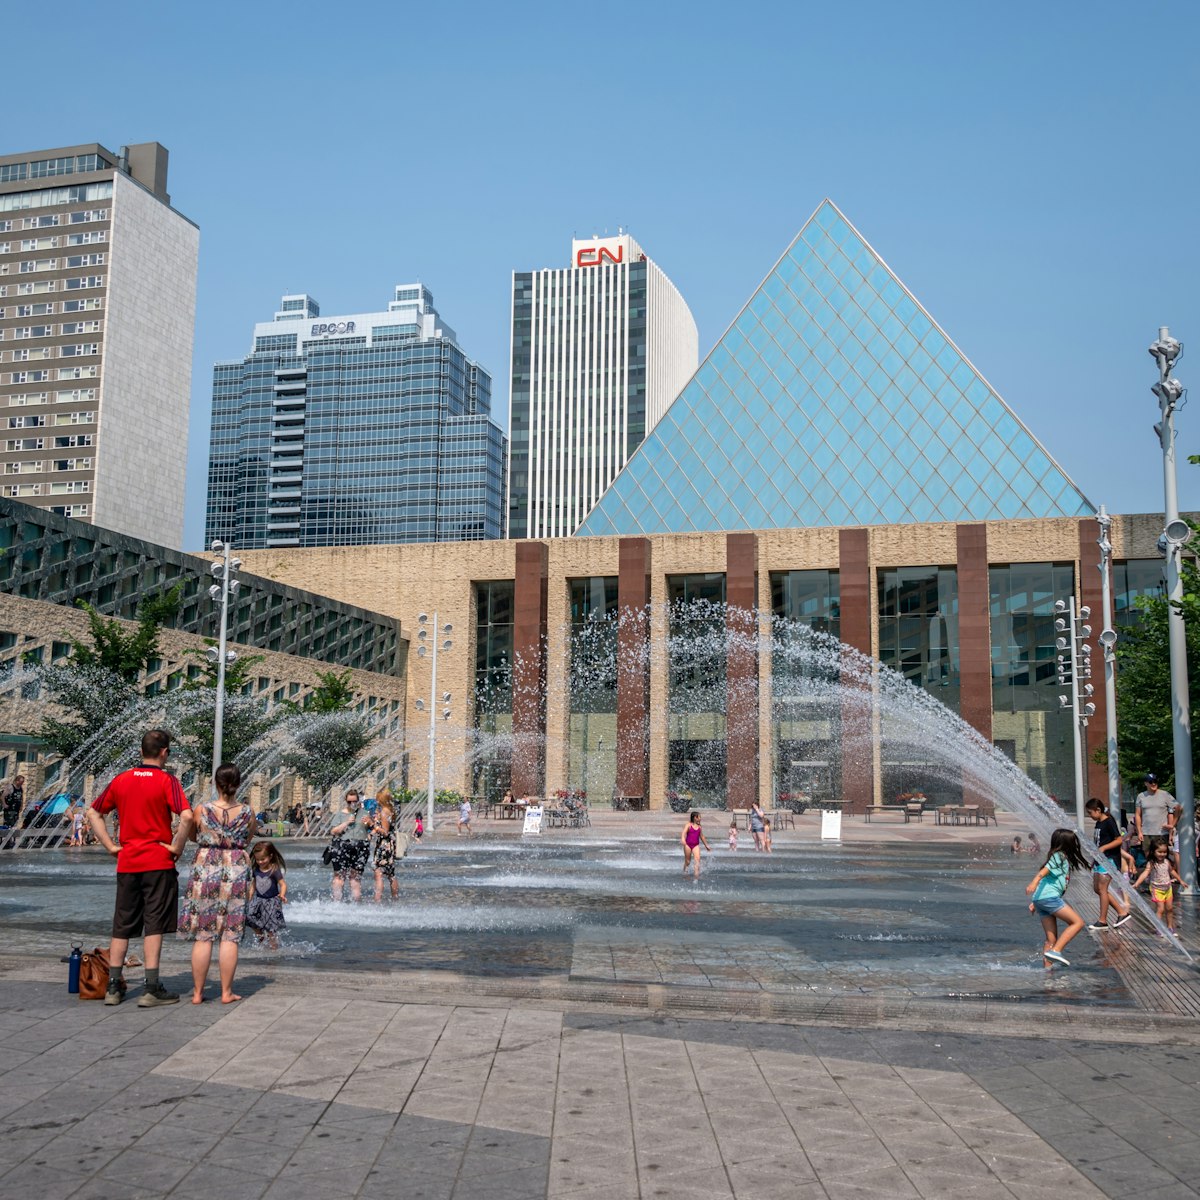 Edmonton, Alberta - July 30, 2021: People playing in the fountains in front of Edmonton city hall.
1332928844
canadian, children, city hall, hot day, kids, municipal building, splash park